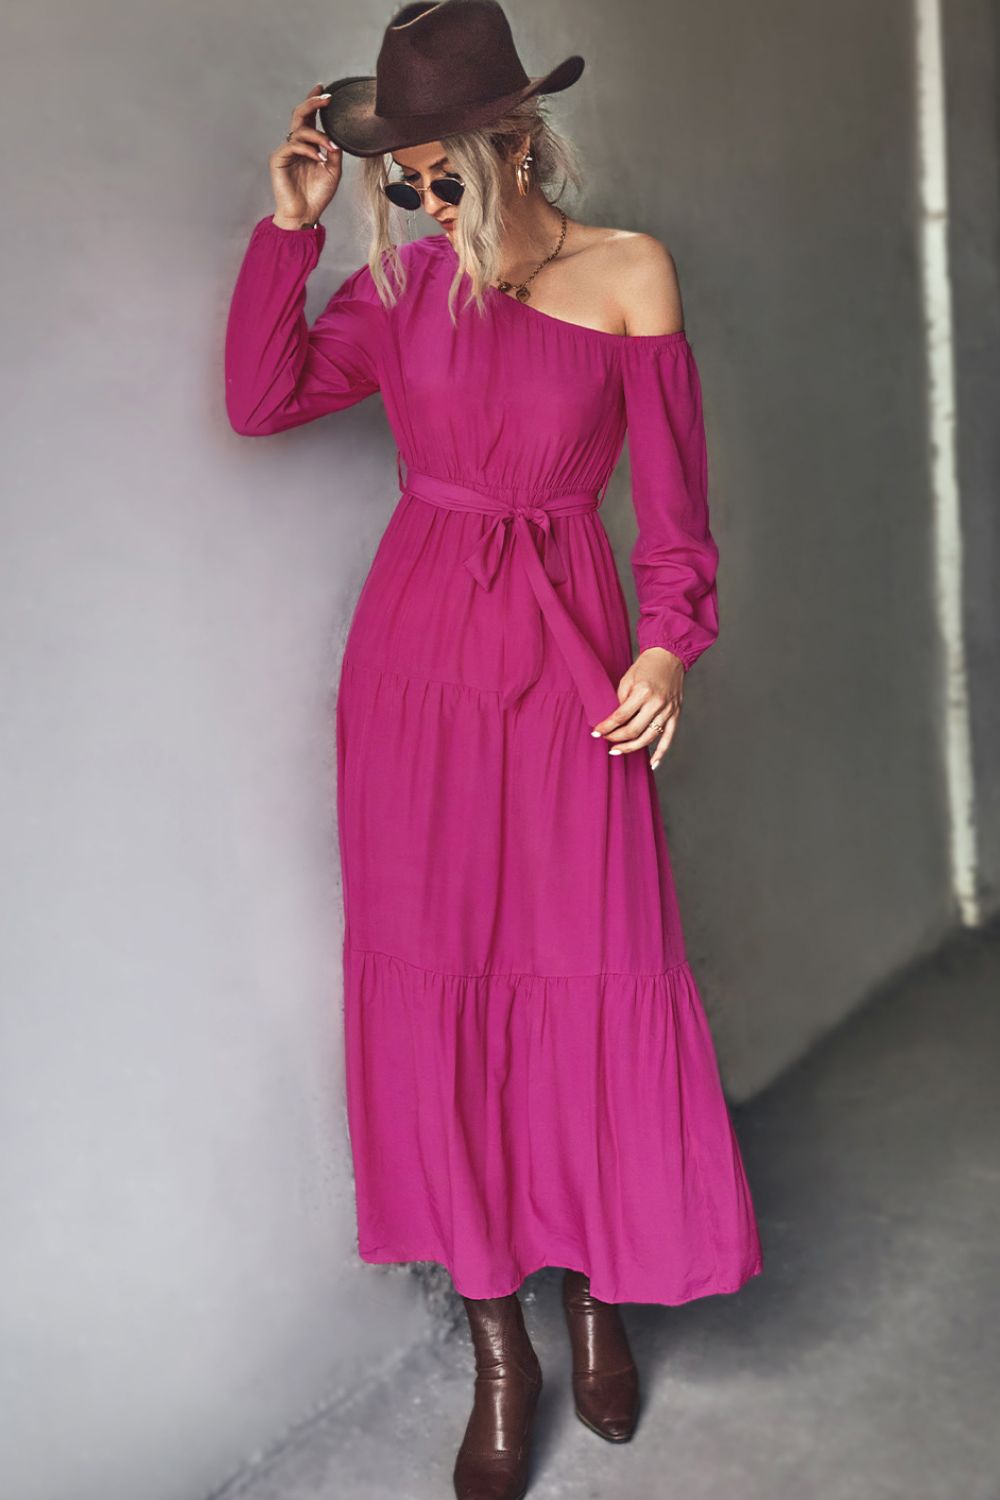 Belted One-Shoulder Tiered Maxi Dress - Women &amp; Men Fashion Store | JL Fashion Store